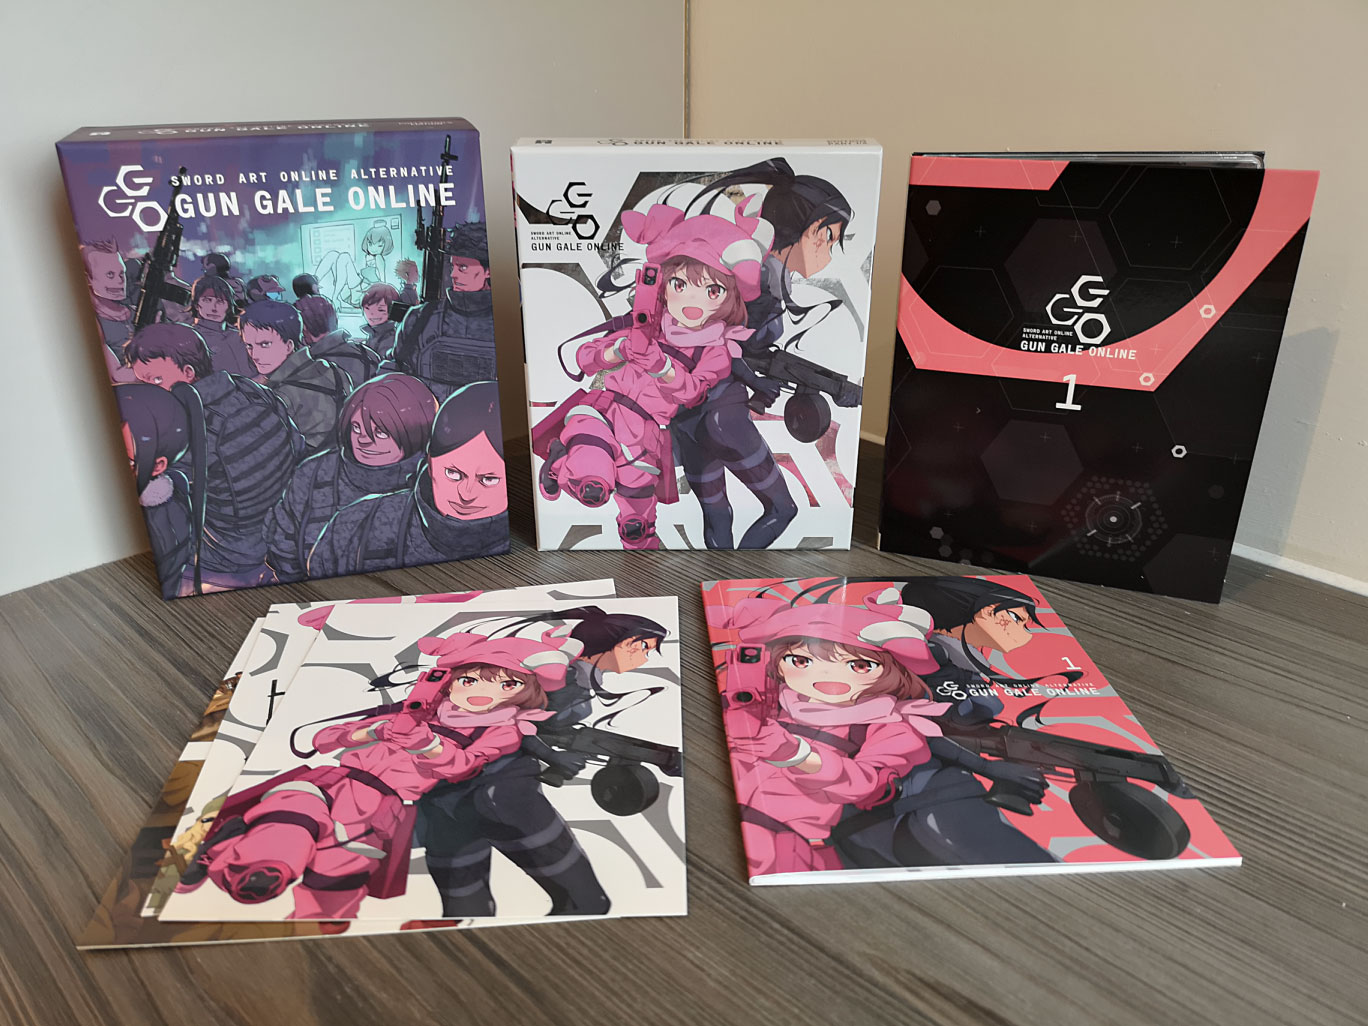 Valvrave the Liberator Season 2 (Limited Edition Blu-ray) Unboxing – The  Normanic Vault